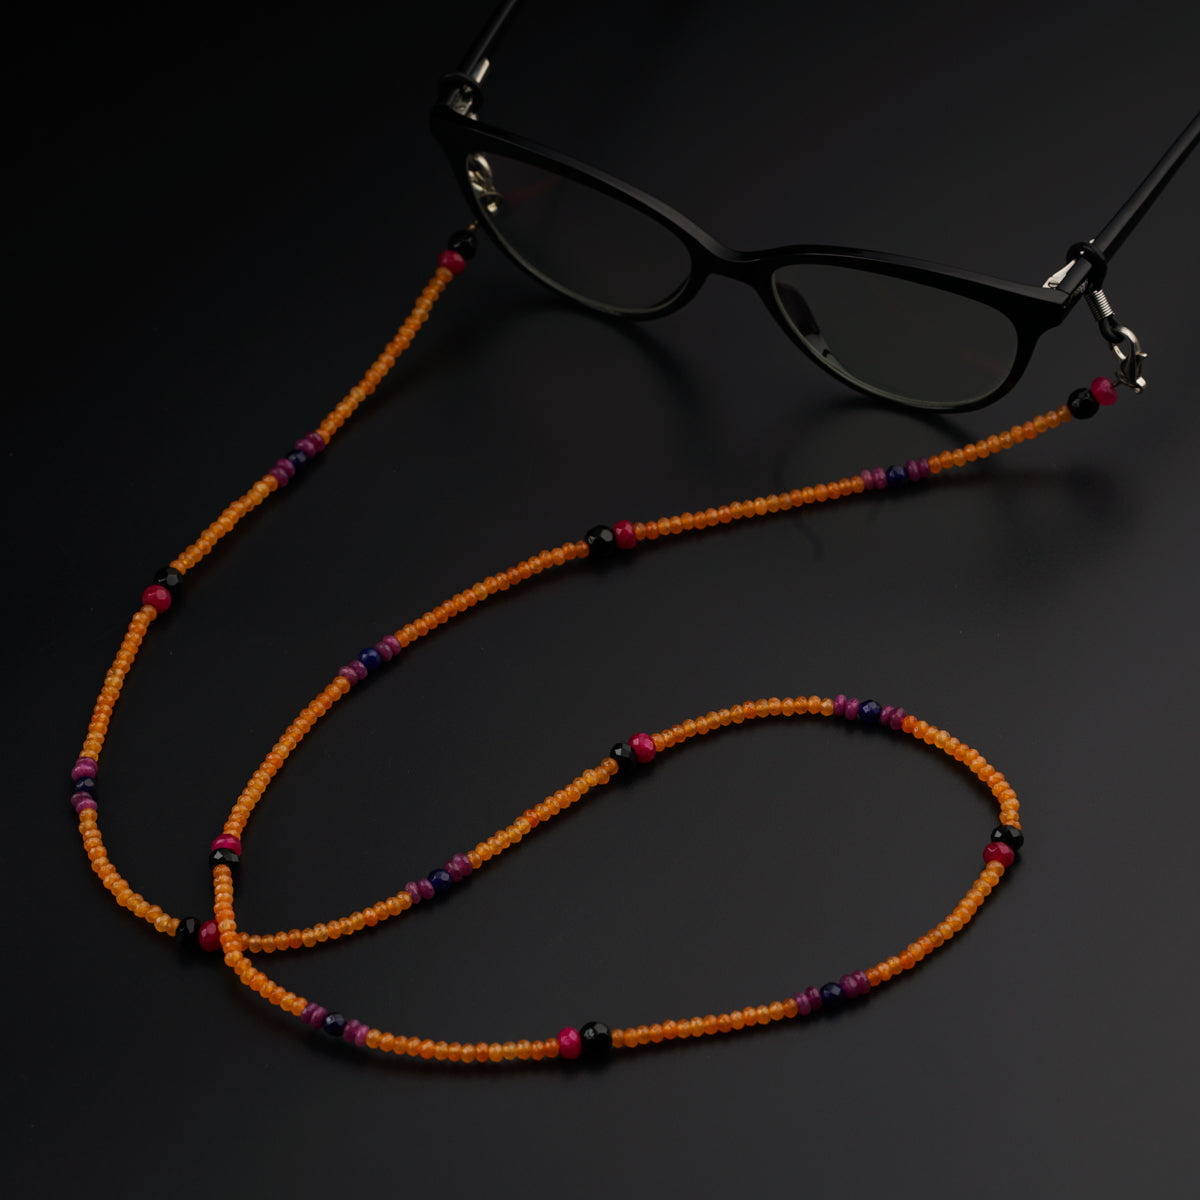 a pair of glasses sitting on top of a beaded necklace